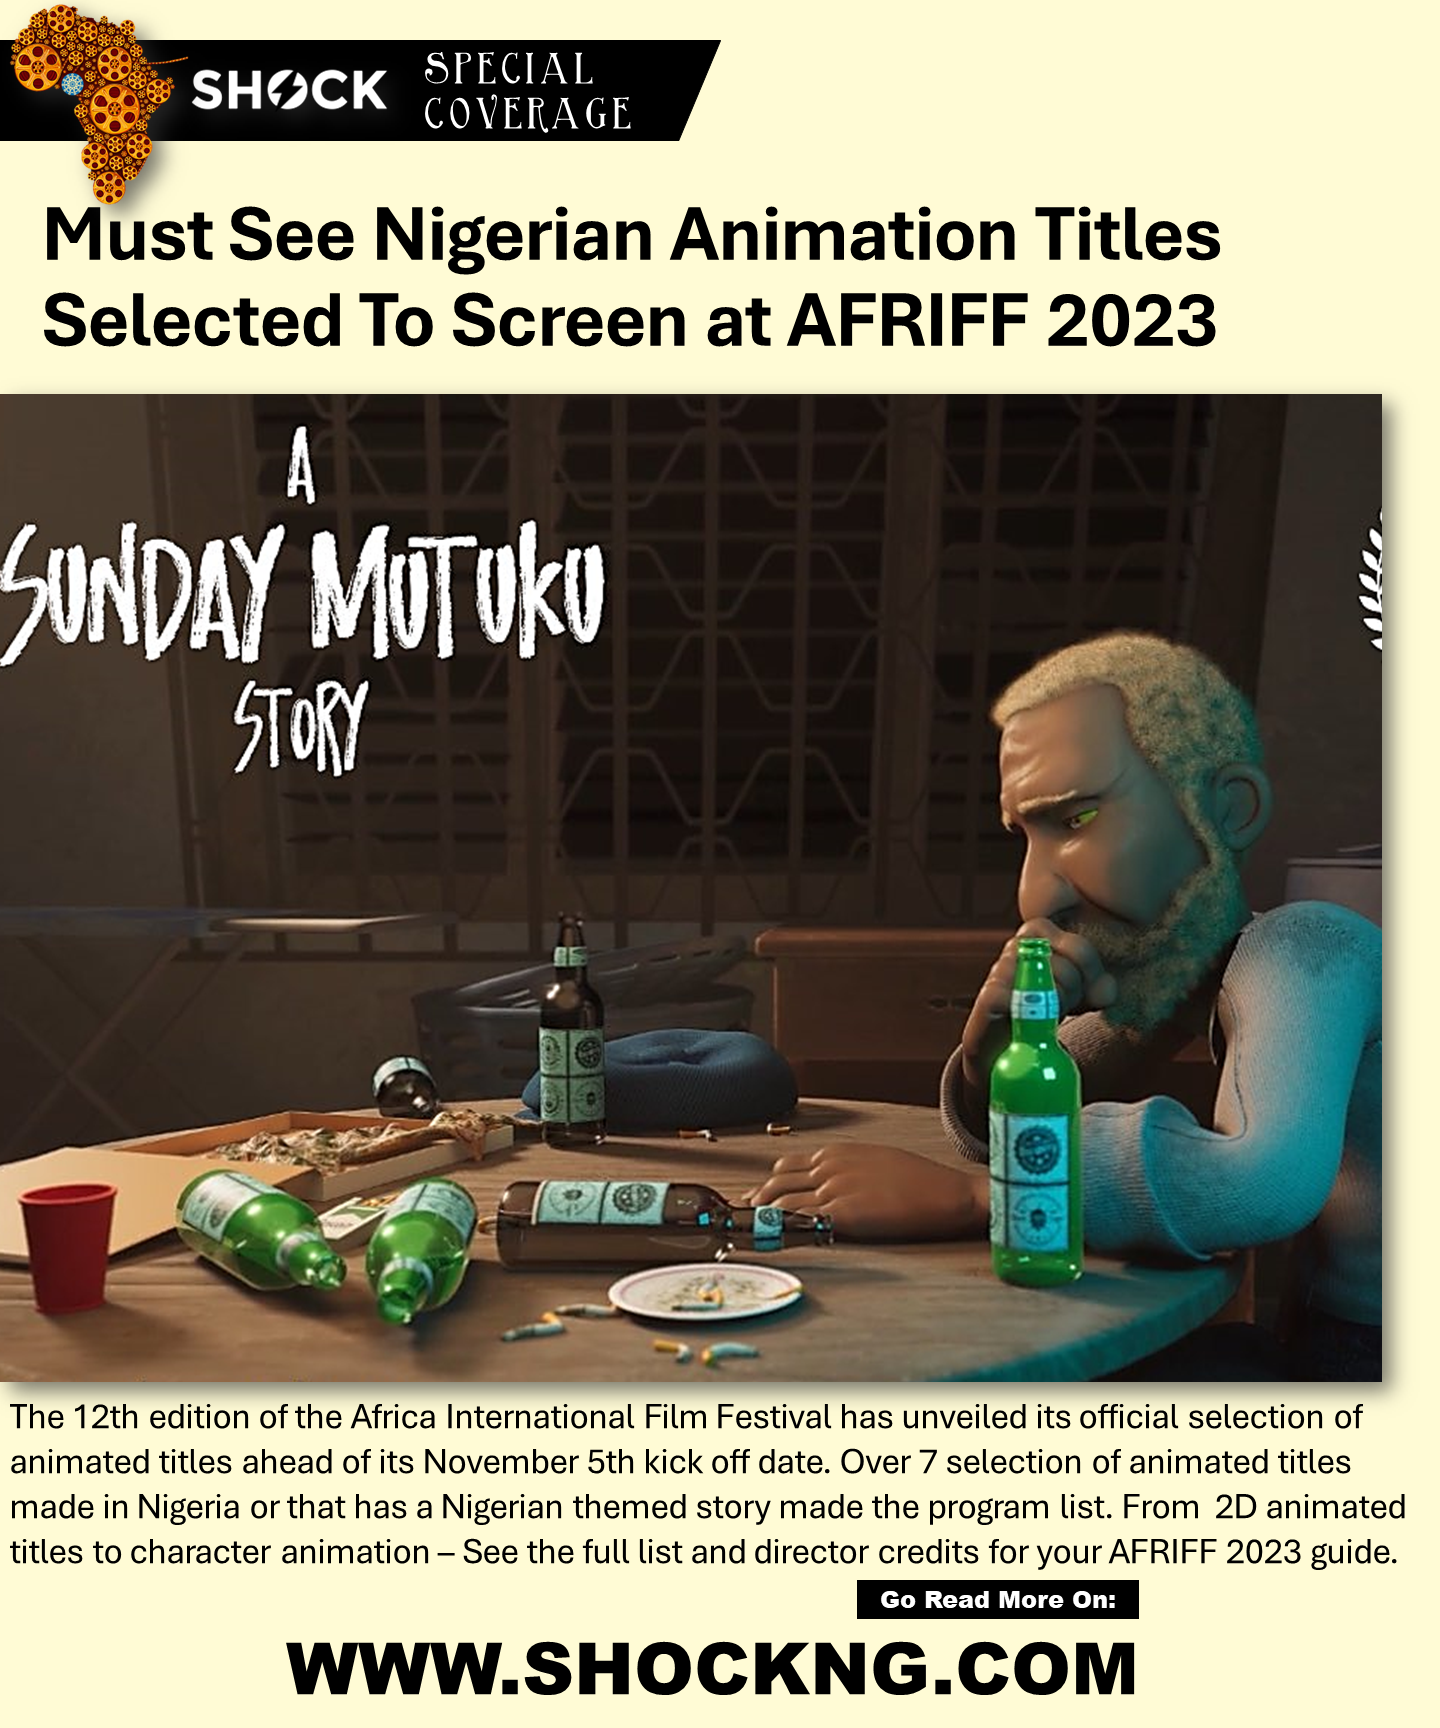 AFRIFF 2023 animation - Full List of Animation Titles Selected To Screen at AFRIFF 2023